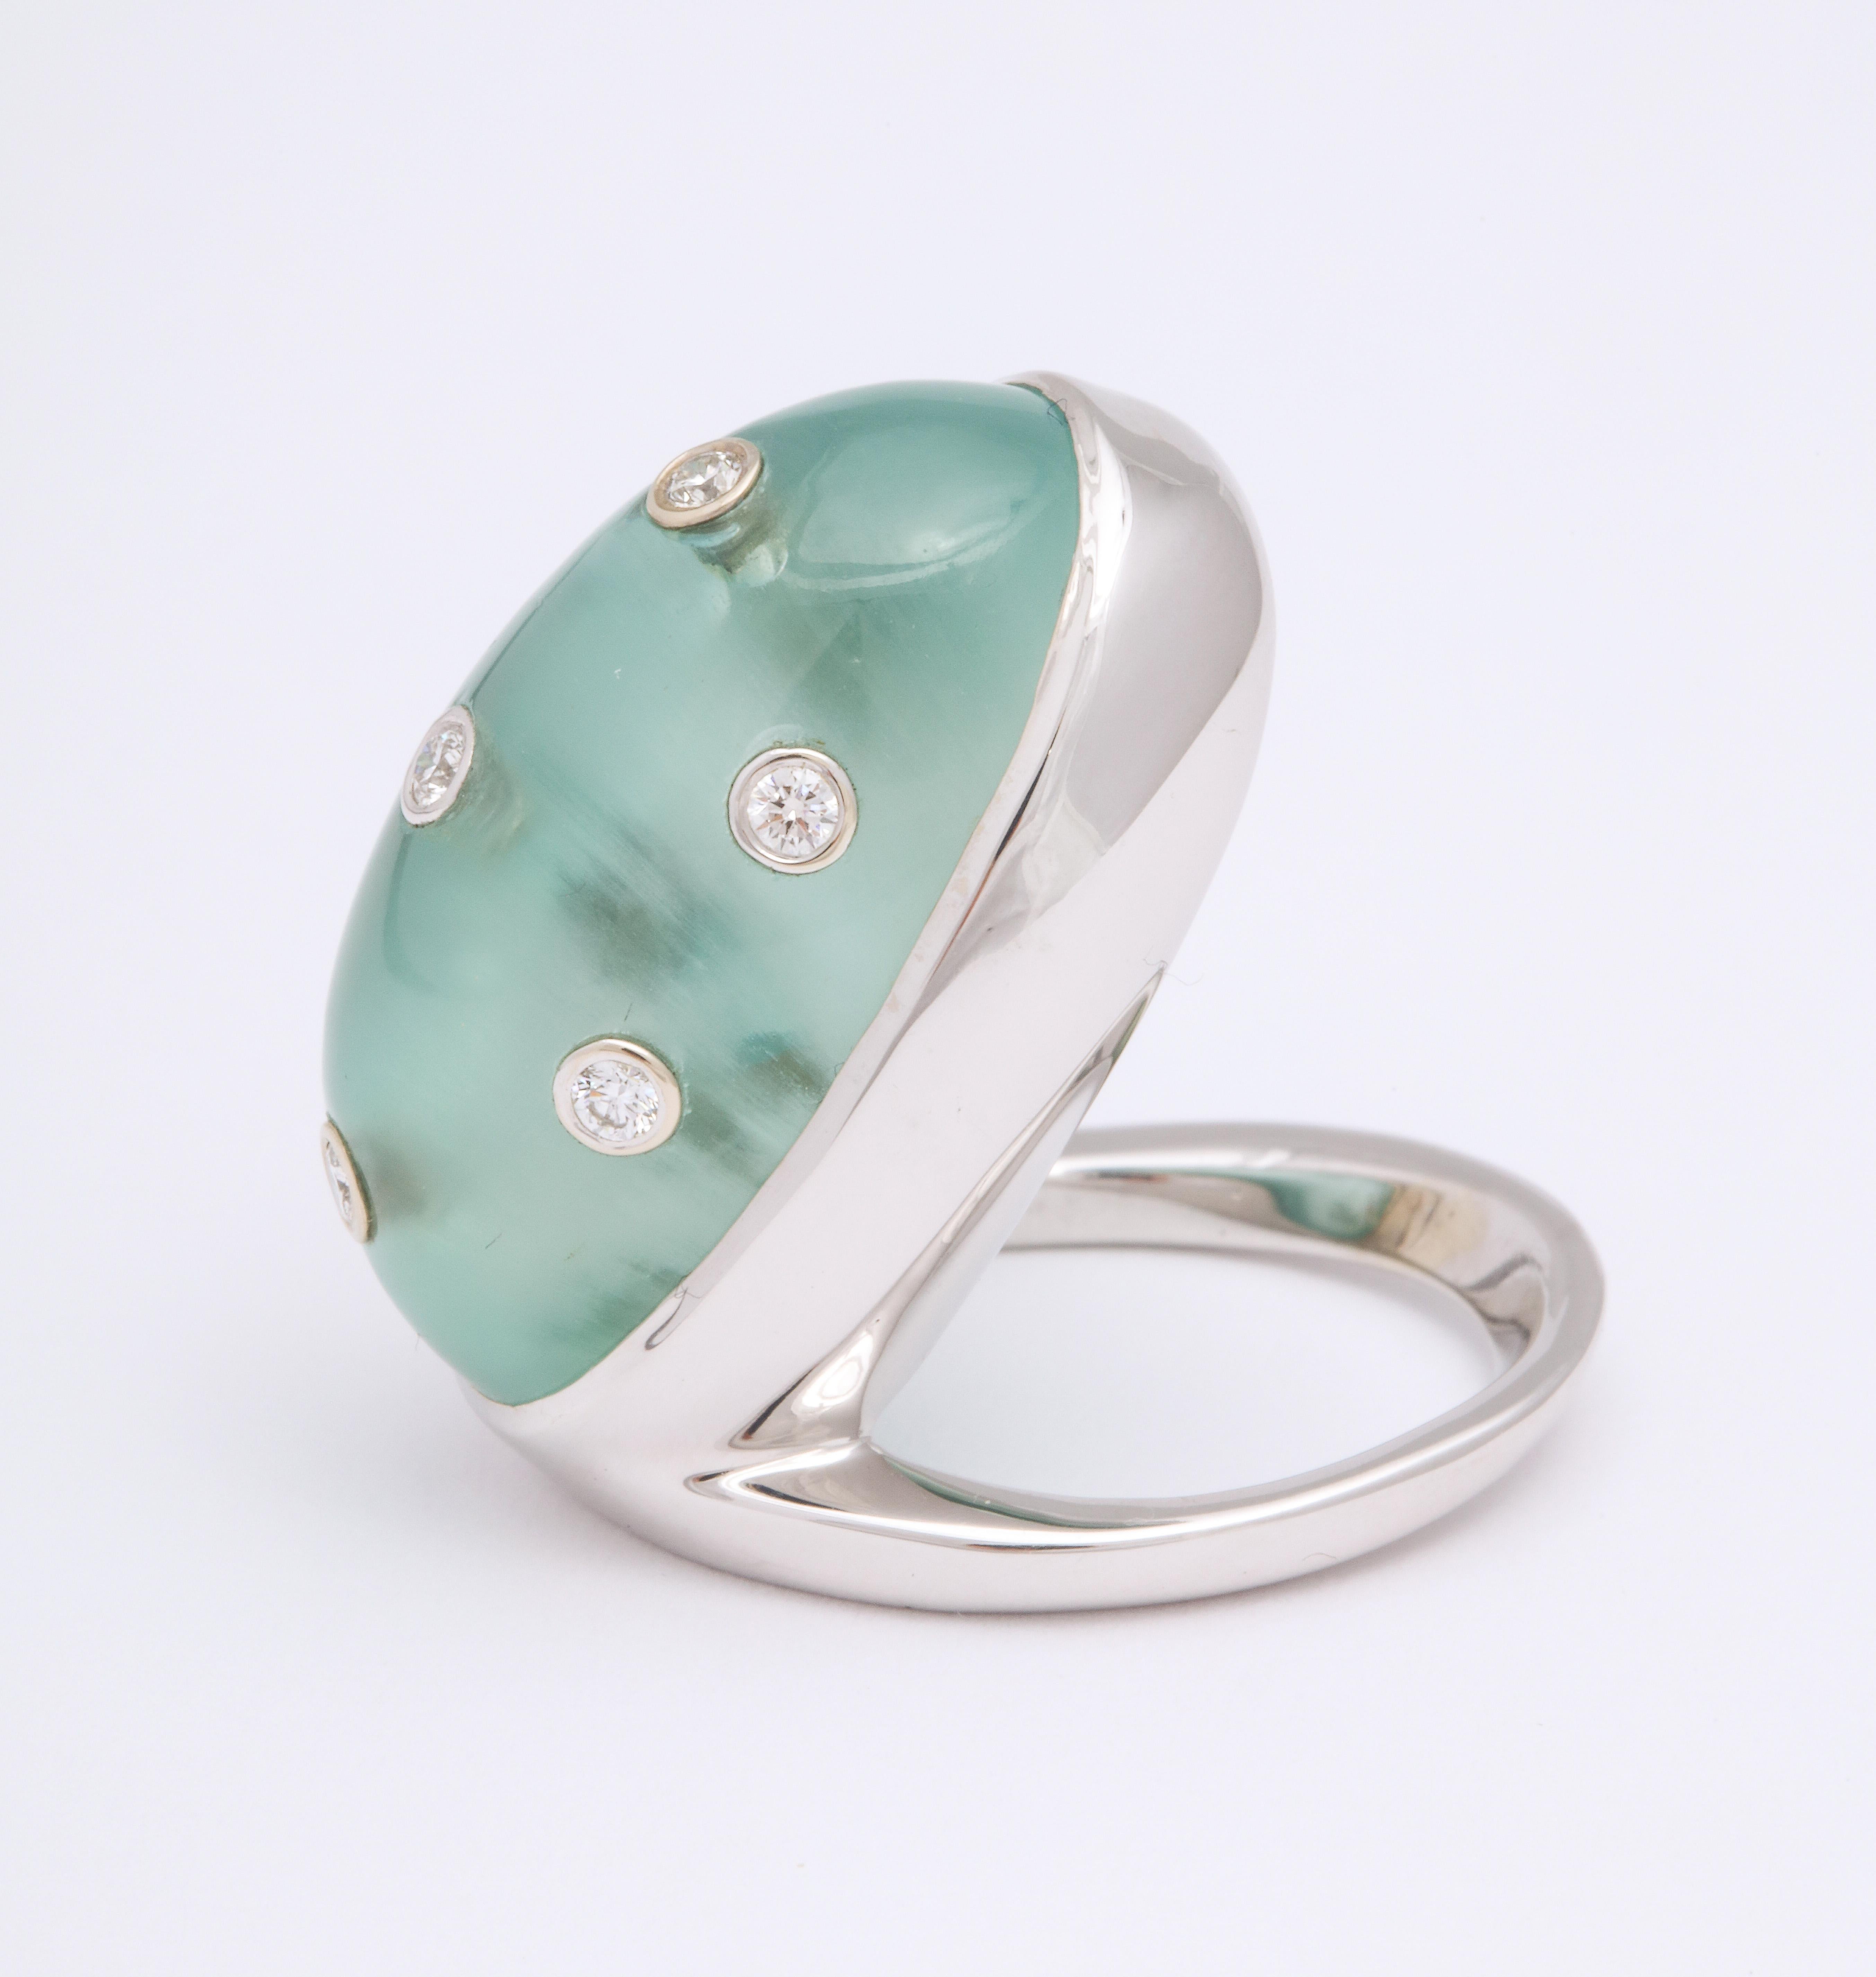 A modern ring featuring an unusually large aquamarine cabochon gemstone, weighing 42.32 carats. This asymmetrical bezel setting is a playful take on a medieval classic; a 21st century edition bezel-set solitaire made in 18K white gold. This